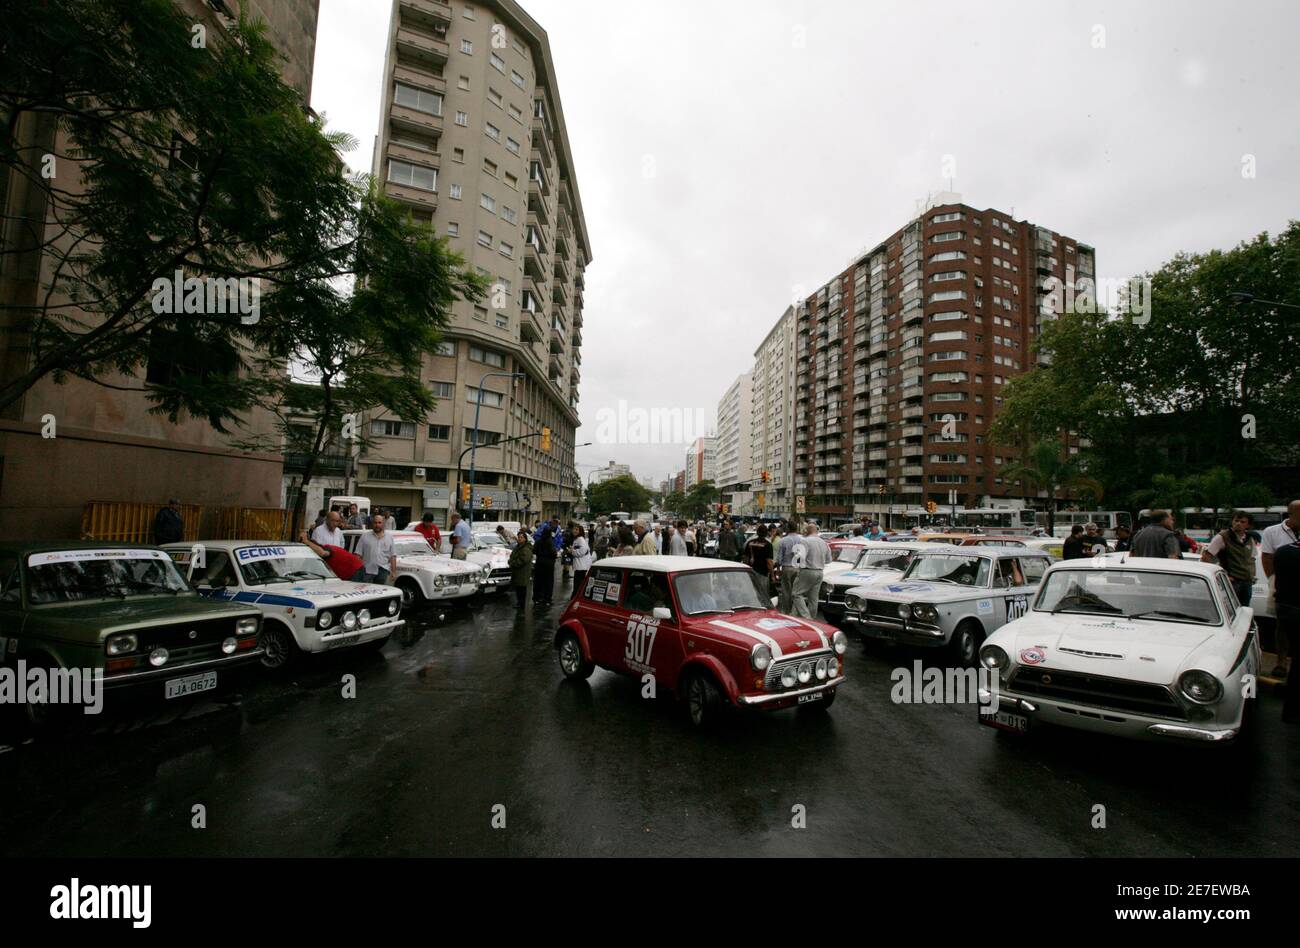 Classic cars are seen before the start of the 'Gran Premio del Uruguay, 19 capitales historico' (Uruguayan great prize, 19 capitals) rally in Montevideo March 4, 2009. Only classic cars are allowed to participate in the rally which covers a route of over 2,500 km (1,553 miles) and traverses the 19 capitals of the provinces of the country. REUTERS/Andres Stapff (URUGUAY) Stock Photo